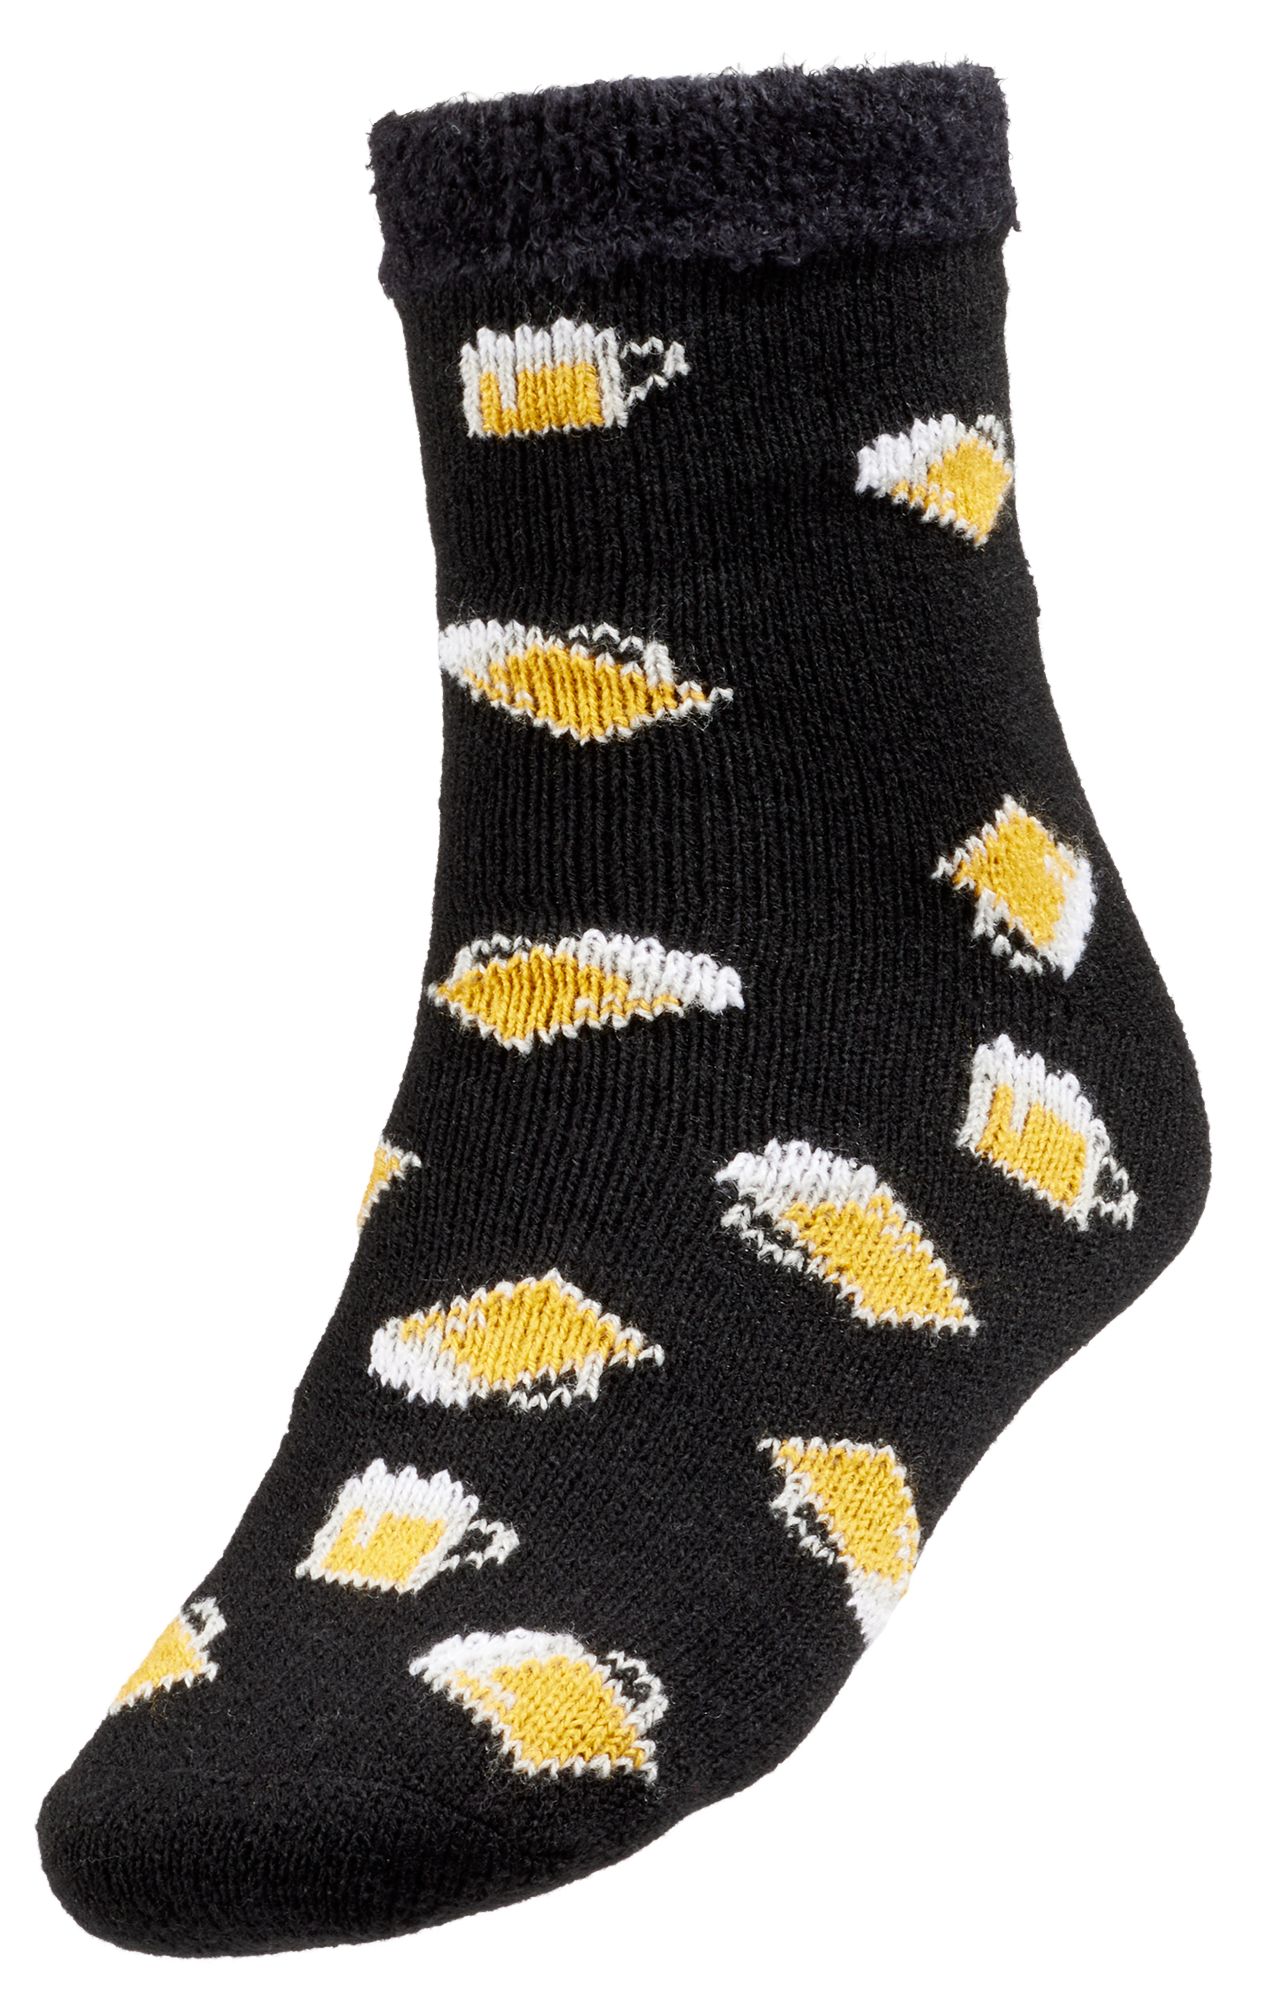 NORTHEAST OUTFITTERS MEN'S COZY CABIN CHEERS SOCKS INTERNATIONAL SHIPPING